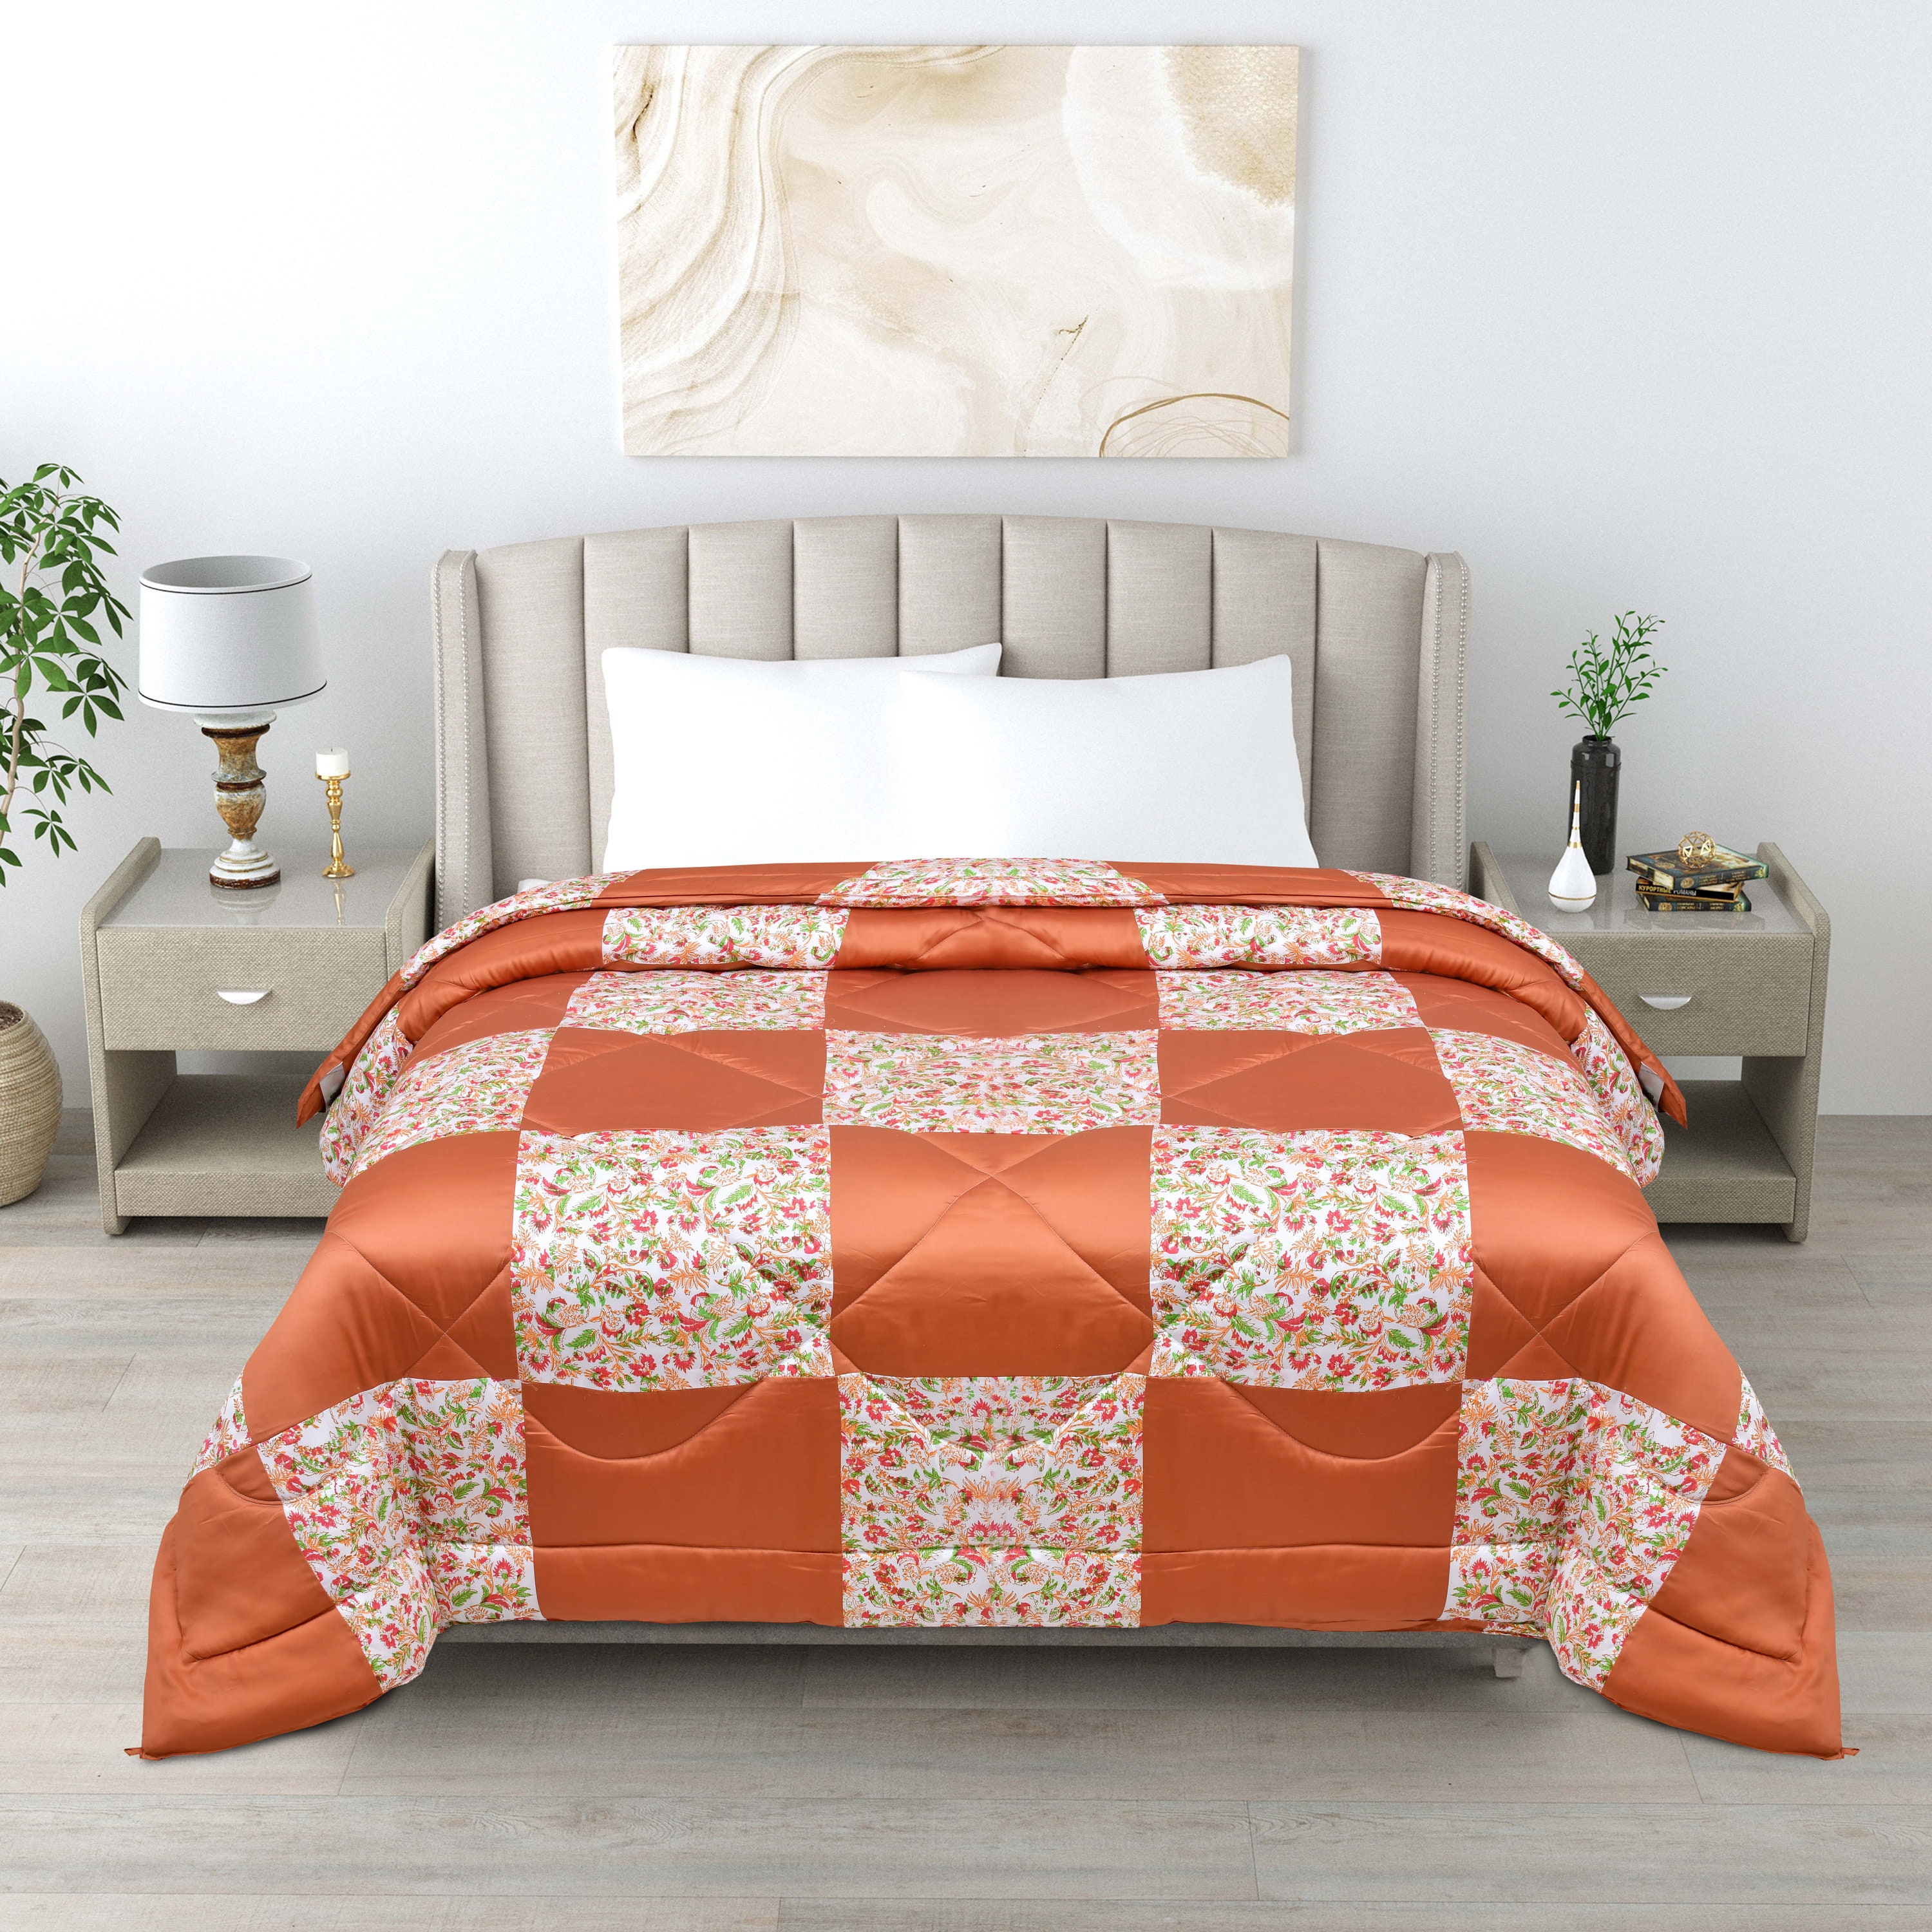 Buy Bedsheets, Dohar, and Comforters in Bulk at Wholesale Prices